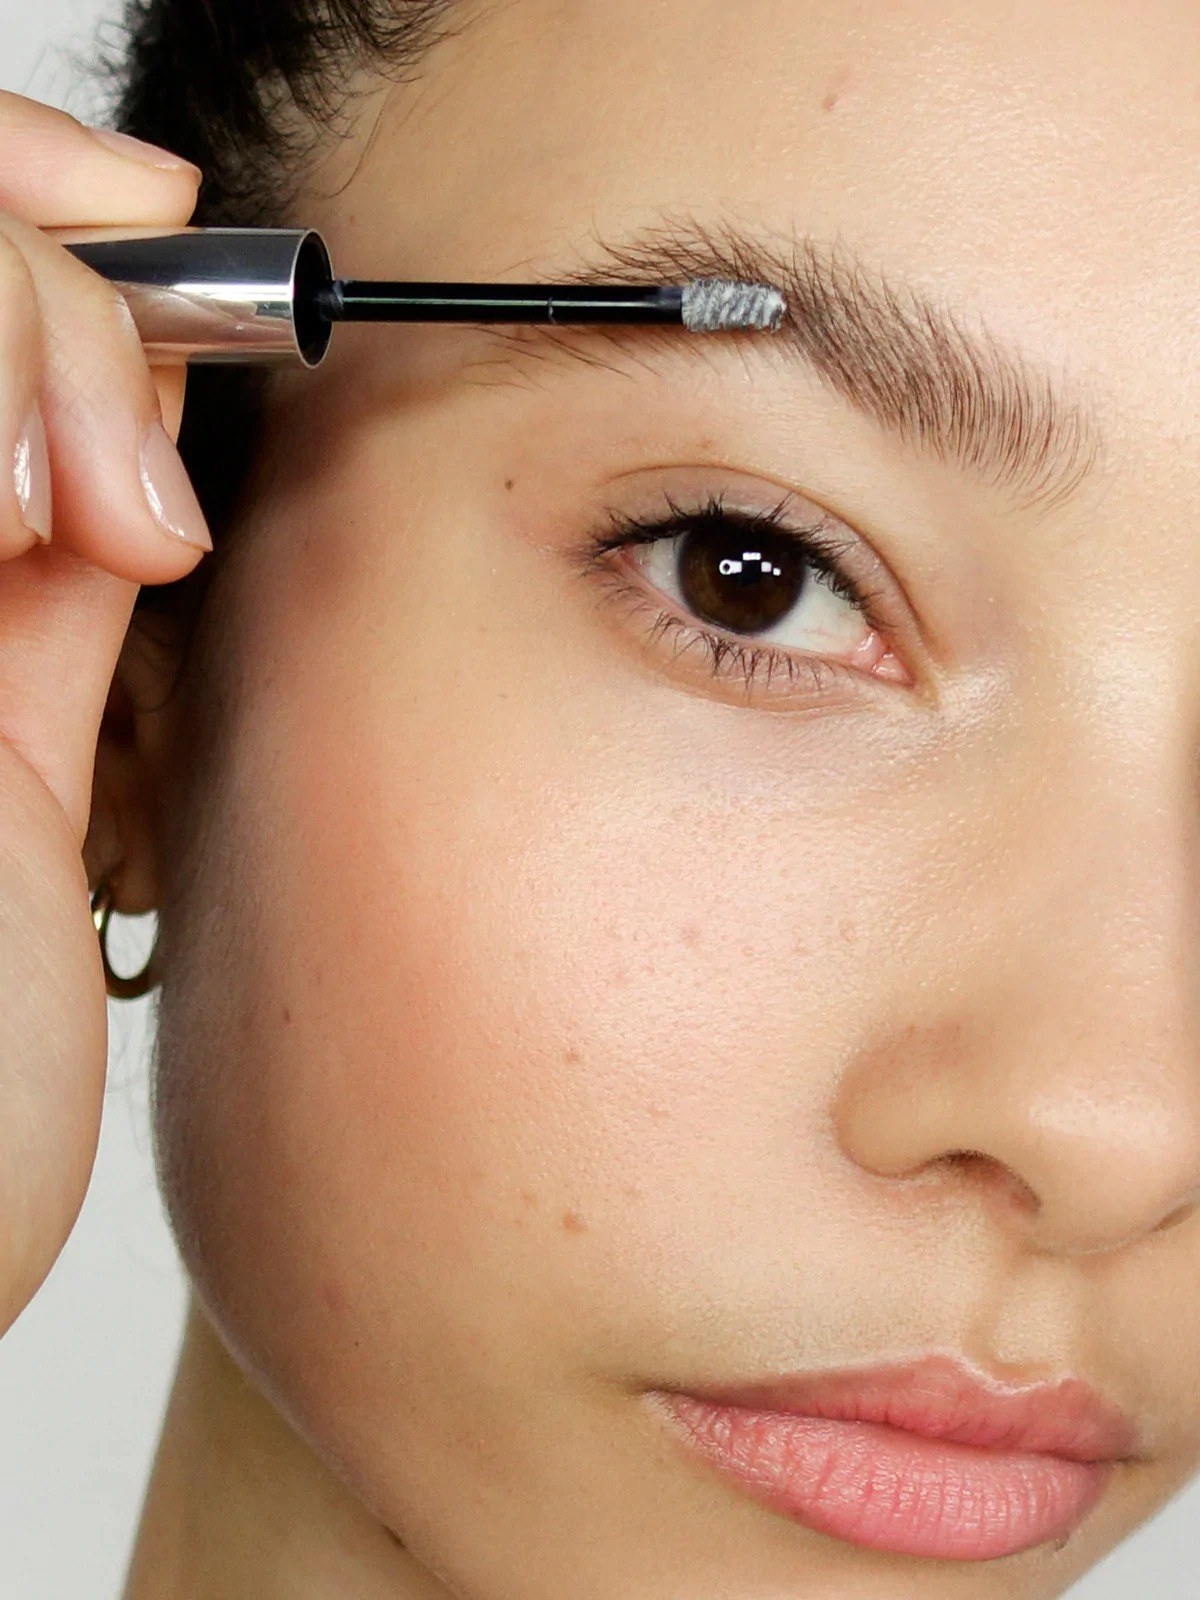 Model putting the clear gel on their brow